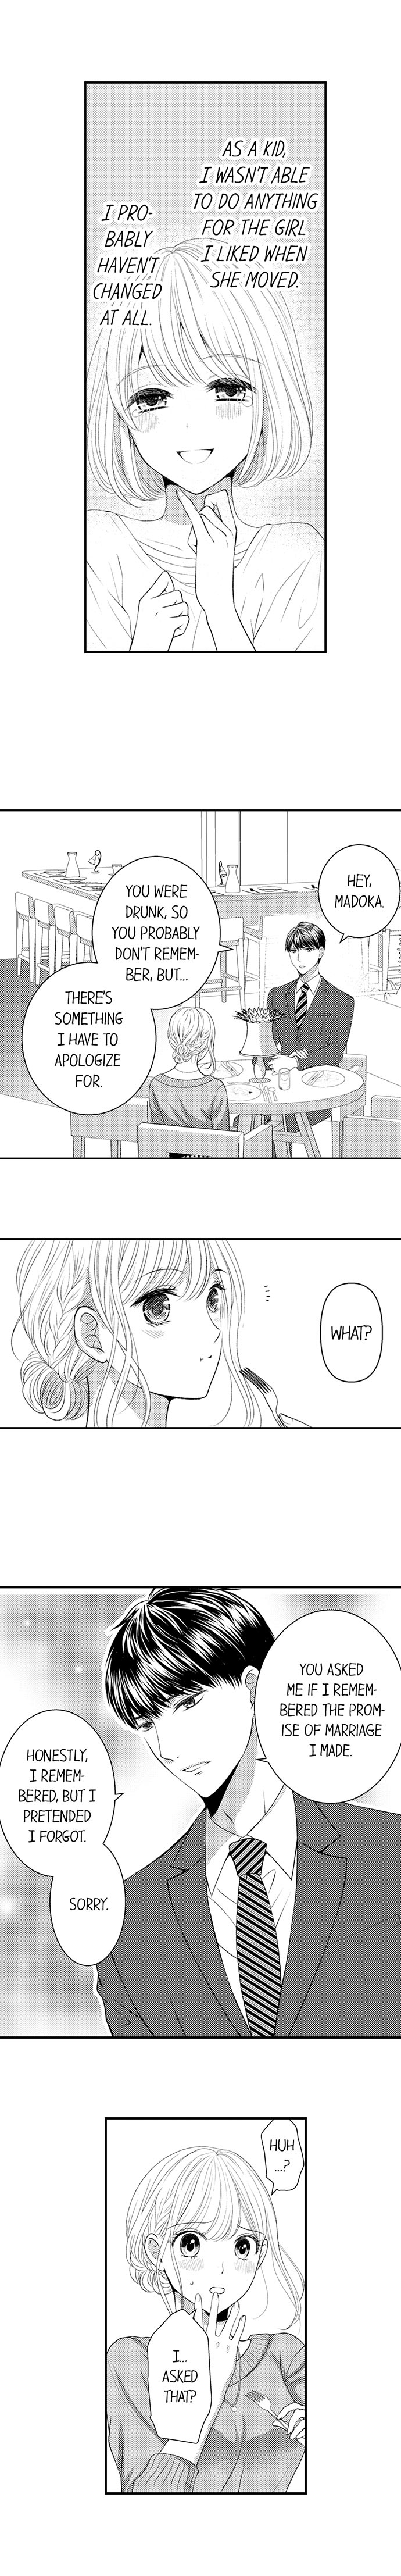 Cheating in a One-Sided Relationship - Chapter 5 Page 4